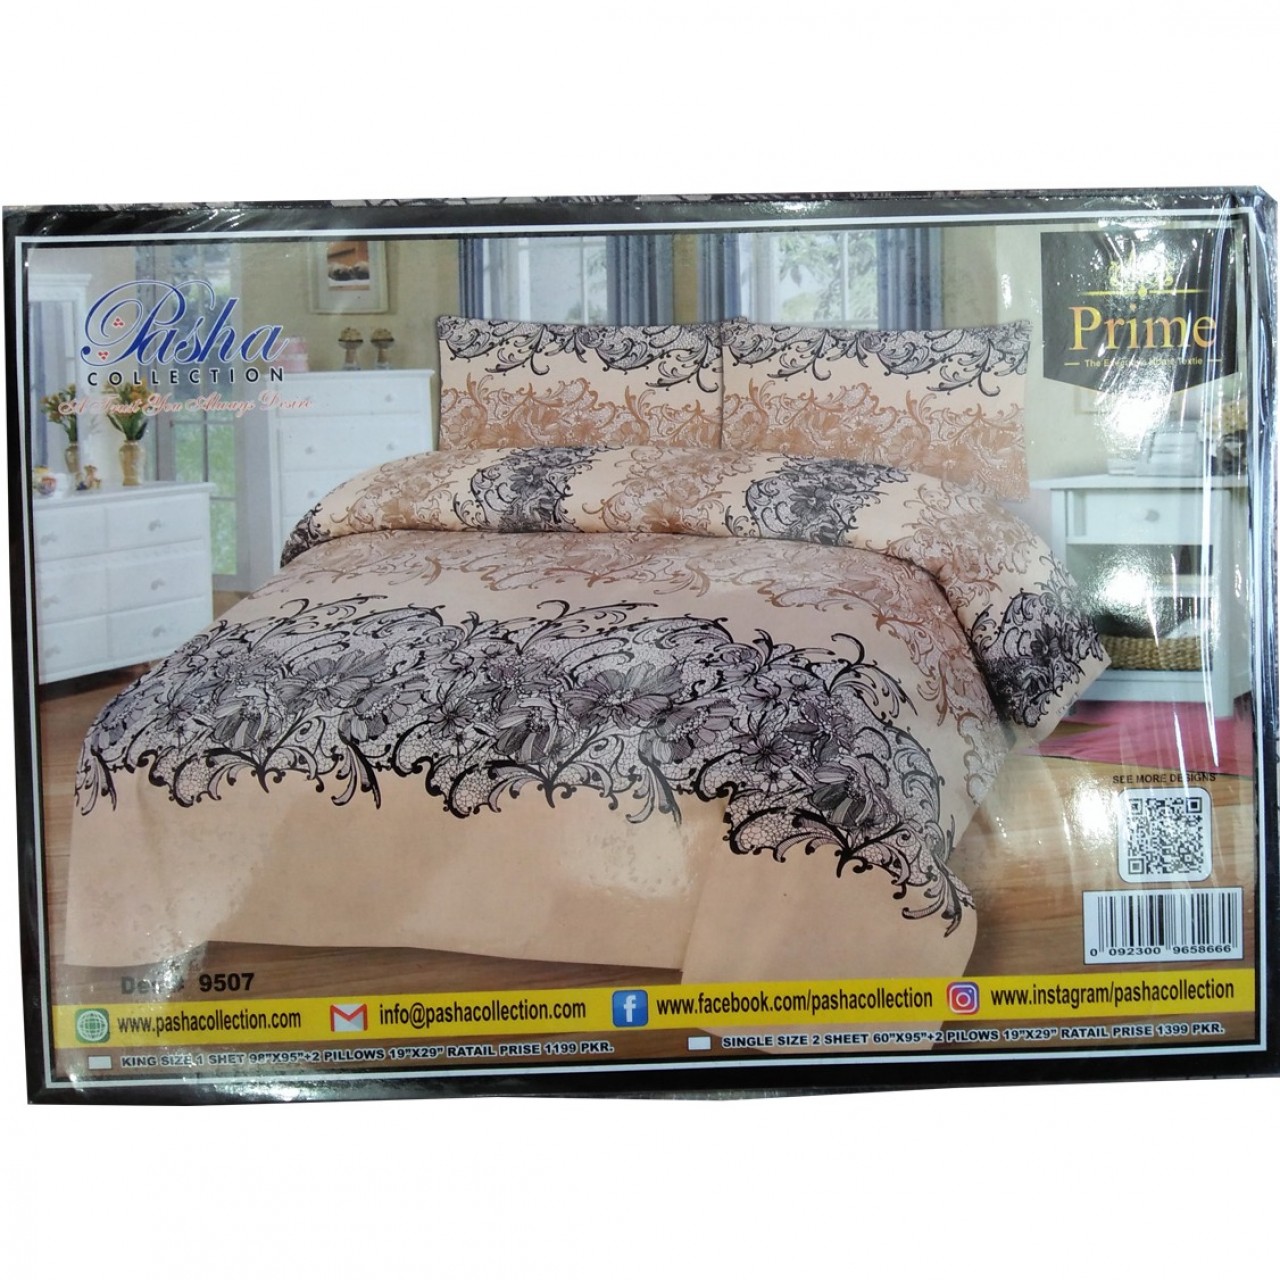 Pasha Collection King Size Double Bed Sheet Des-9507 With 2 Pillow Covers